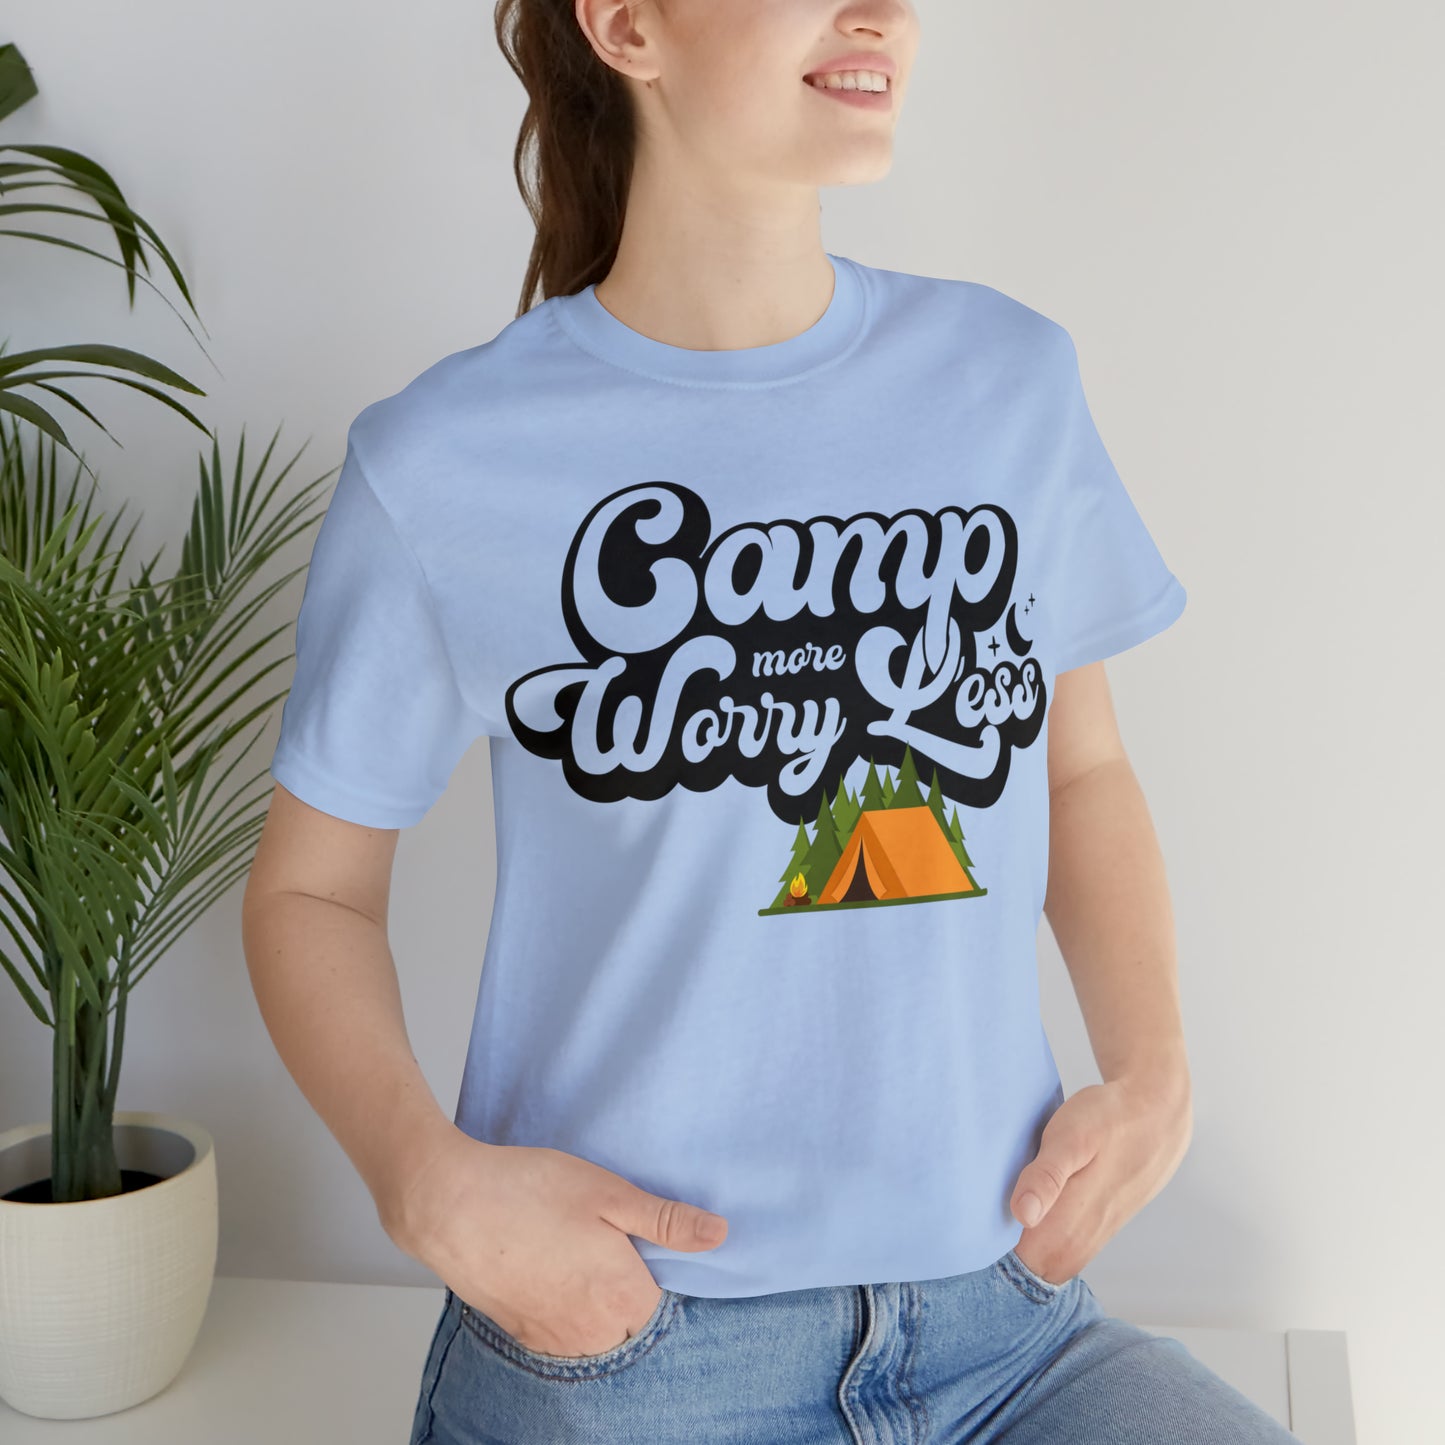 Camp More Worry Less Shirt, Outdoor adventure clothing, Nature-inspired shirts, Outdoor enthusiasts gift, Adventure-themed attire